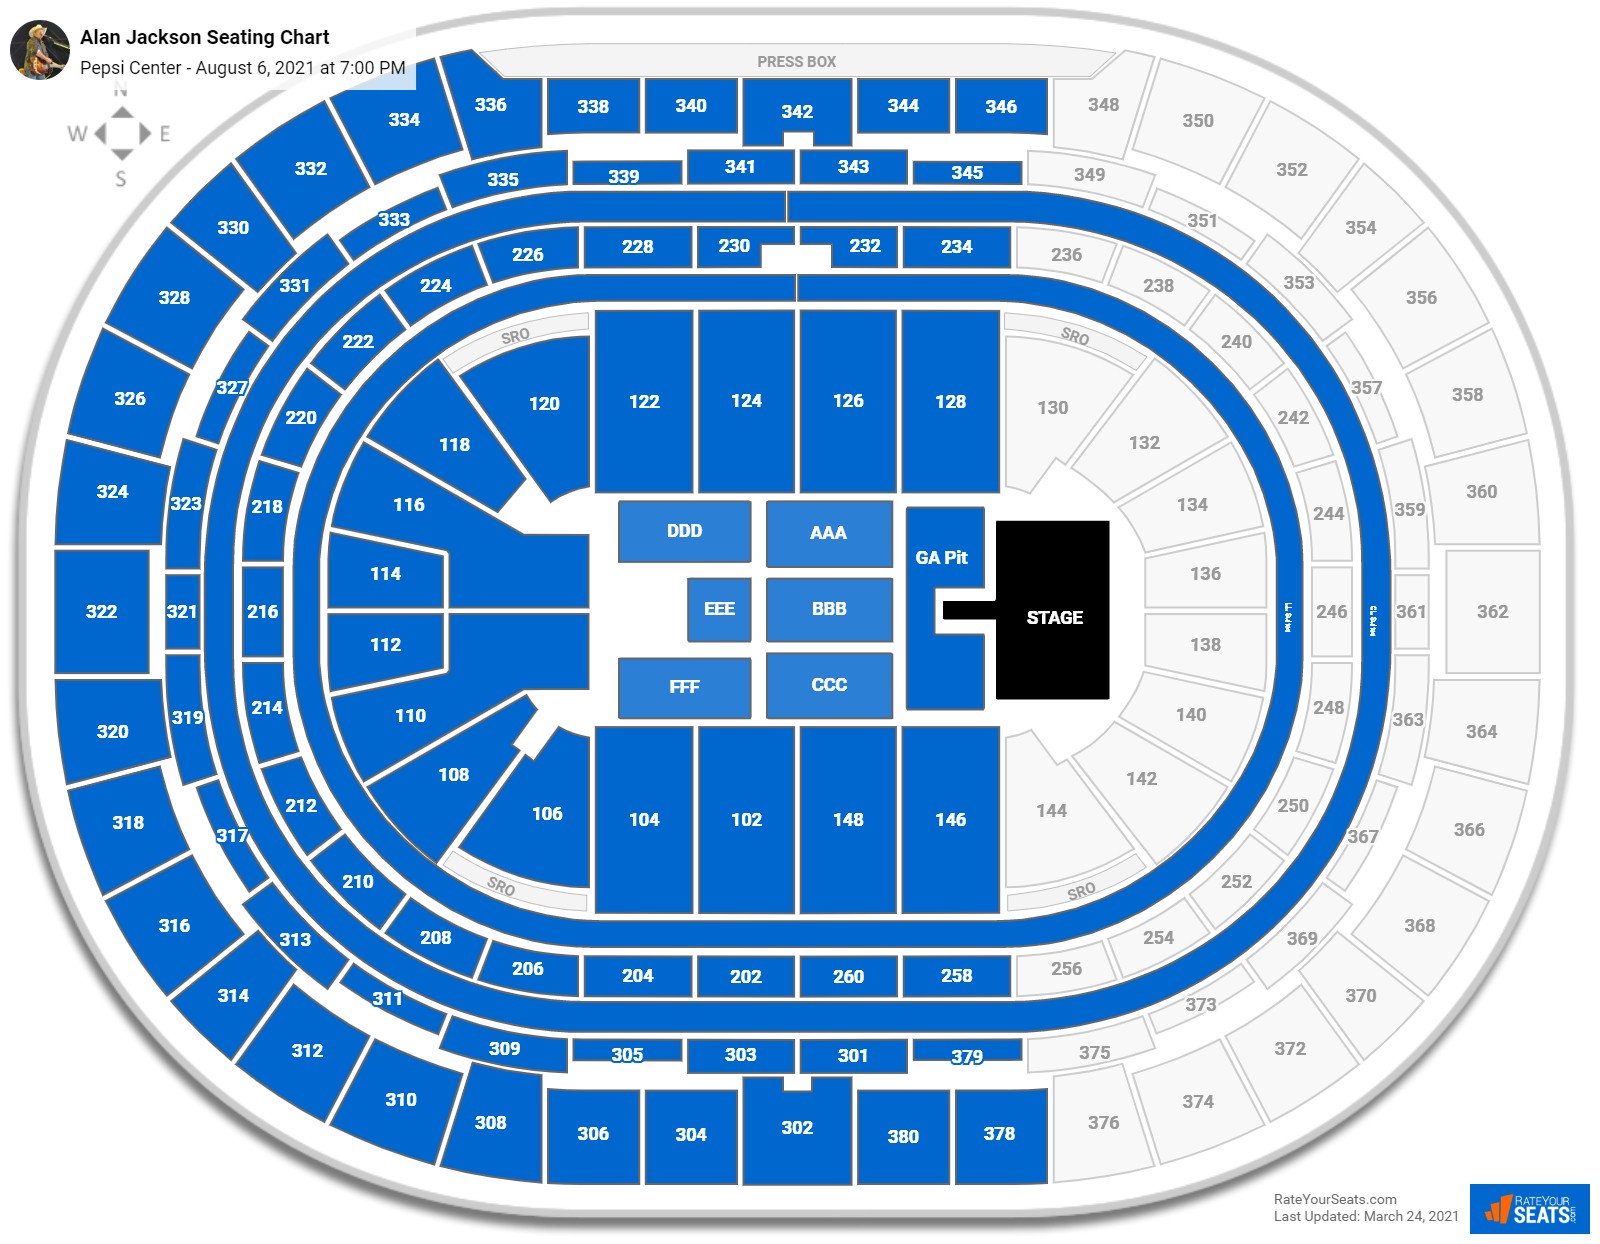 Ball Arena Seating Charts for Concerts